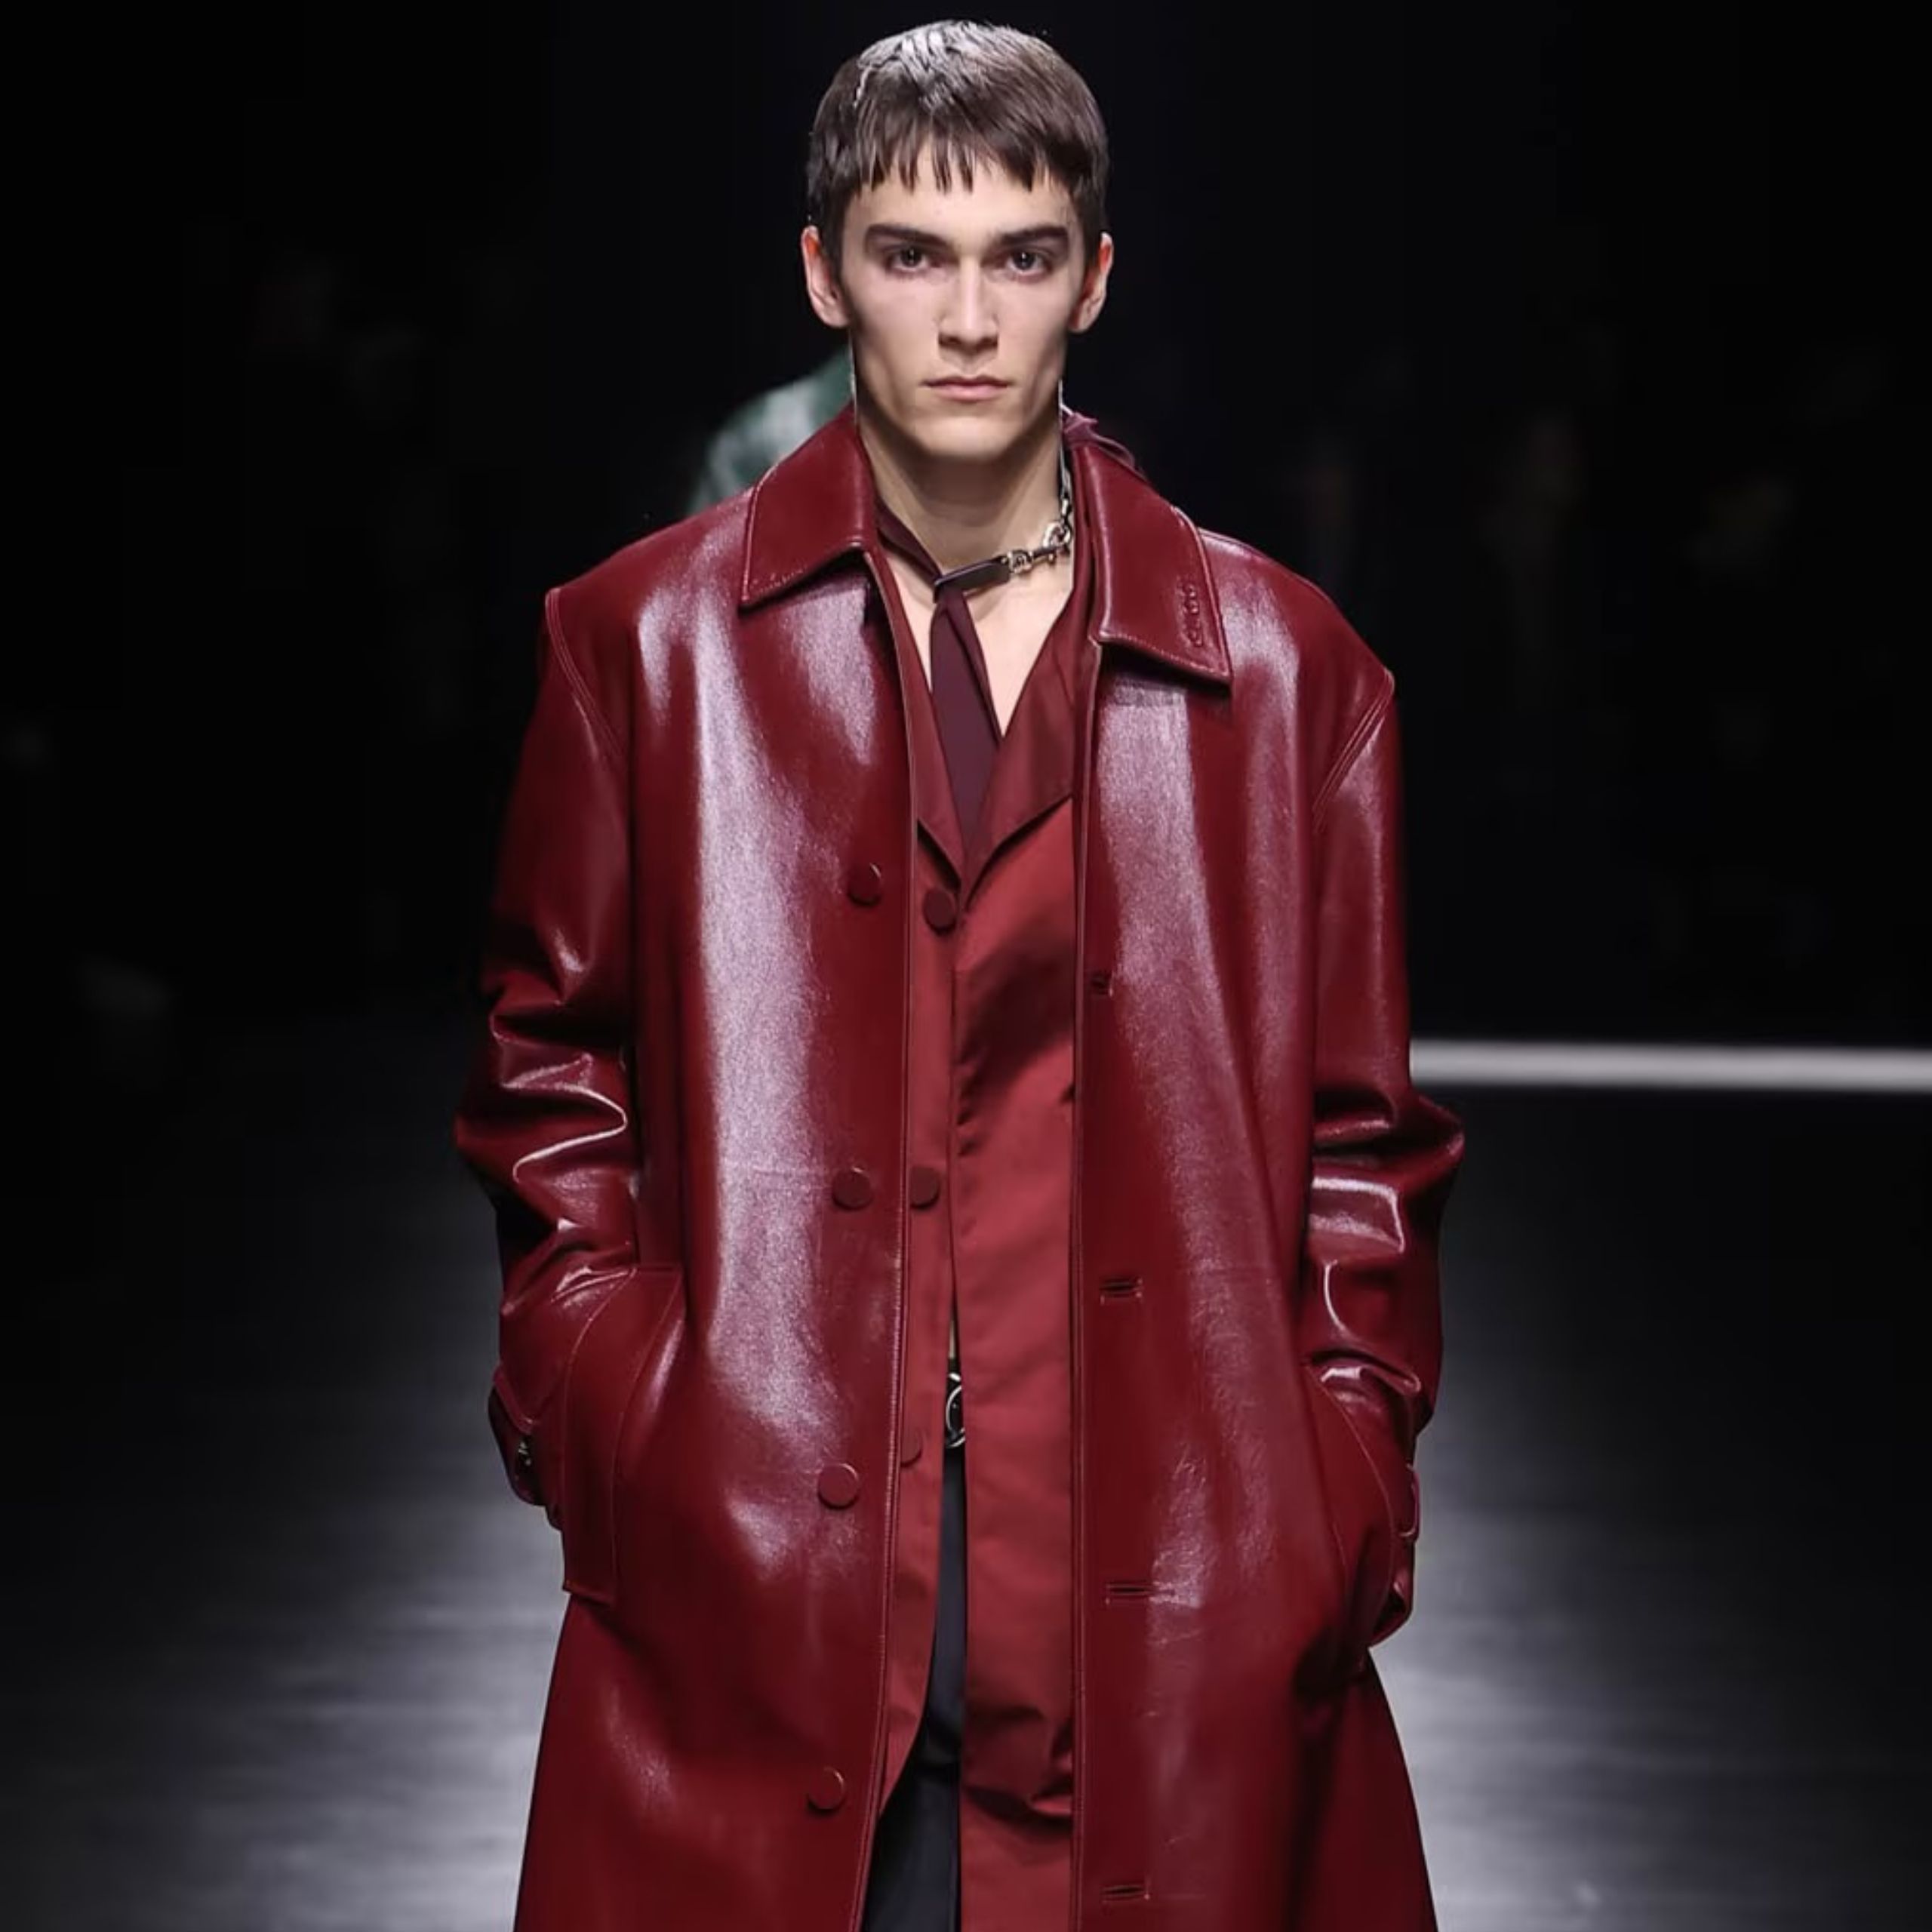 Sabato de Sarno Brings New Masculinity to Light in His First Gucci Menswear Collection